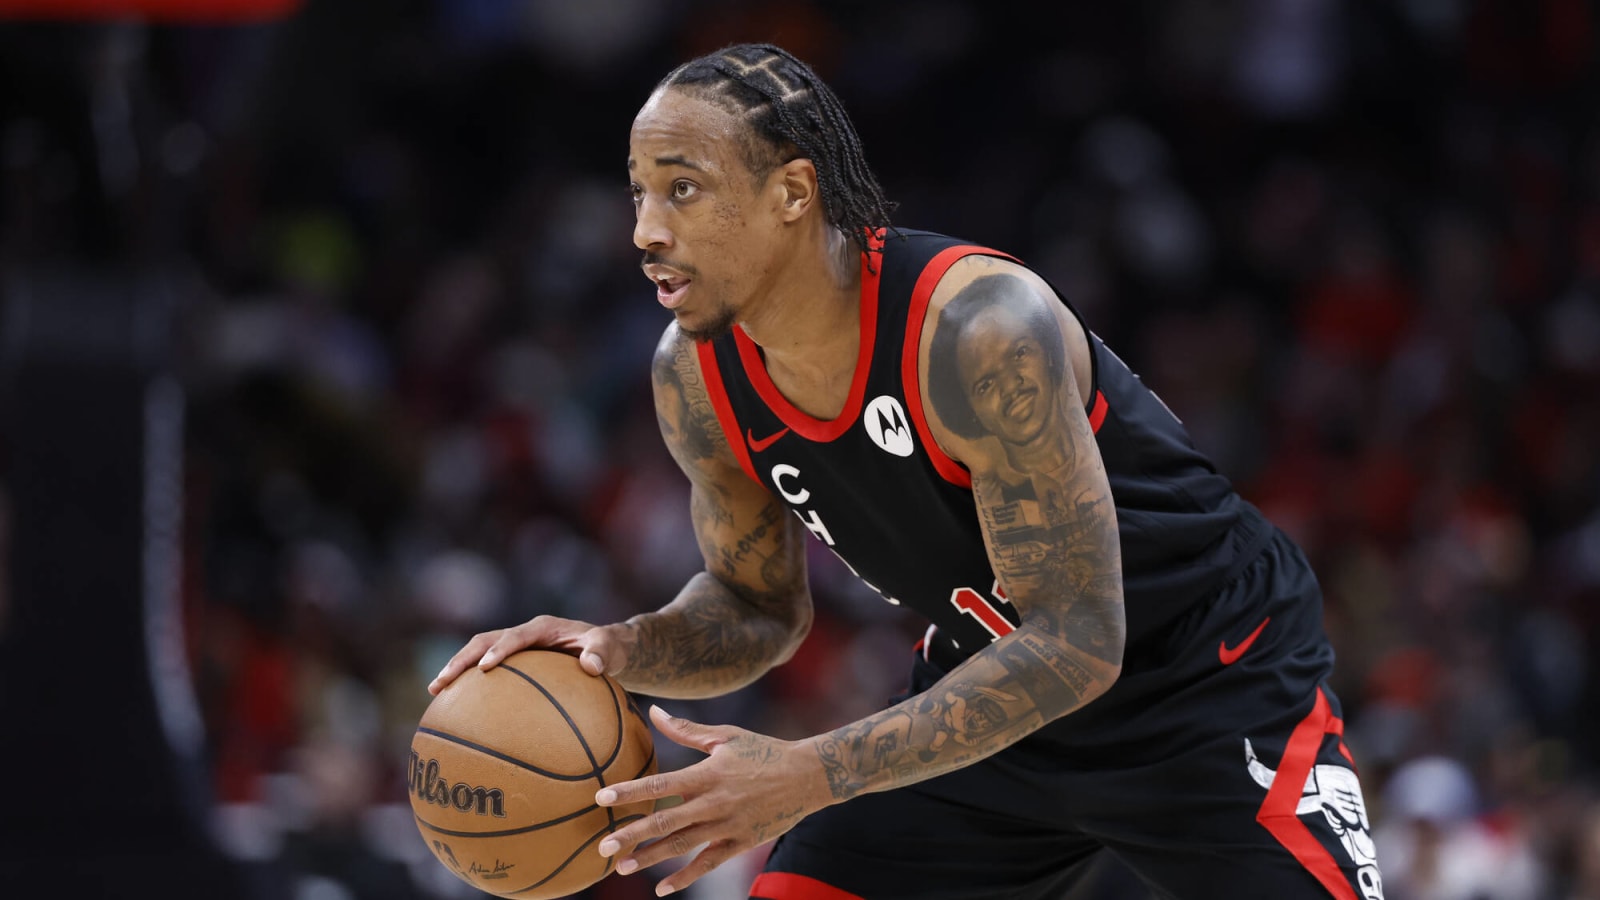 DeRozan’s Dilemma: Unfinished Business or Homecoming Dreams?